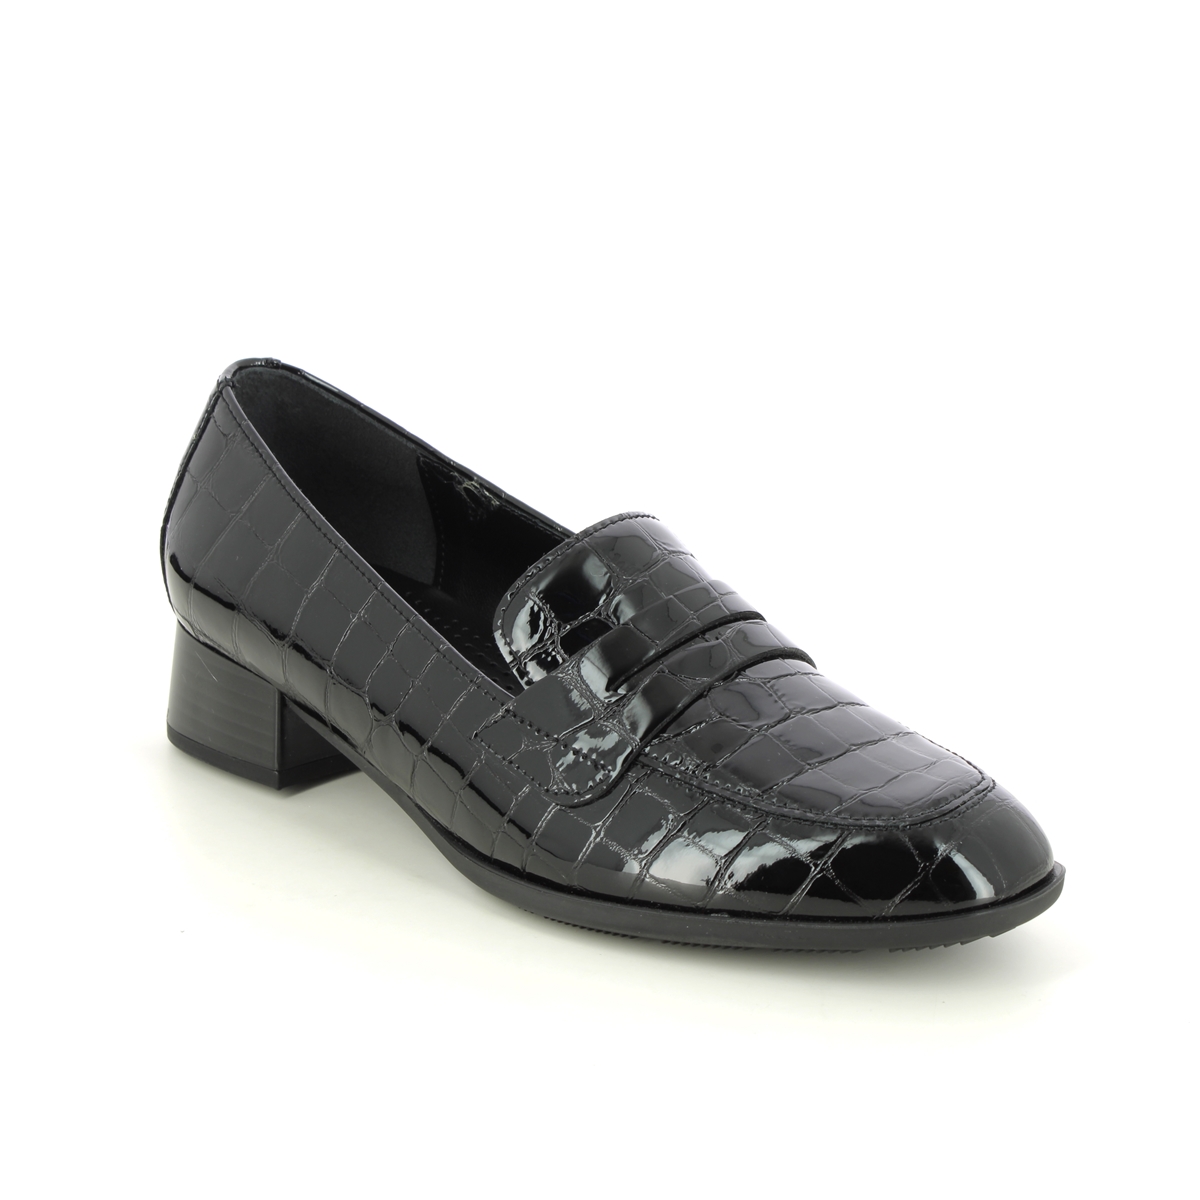 Gabor Right Penny Black Croc Womens Loafers 35.280.97 In Size 5 In Plain Black Croc Effect  Womens Loafers In Soft Black Croc Effect Leather